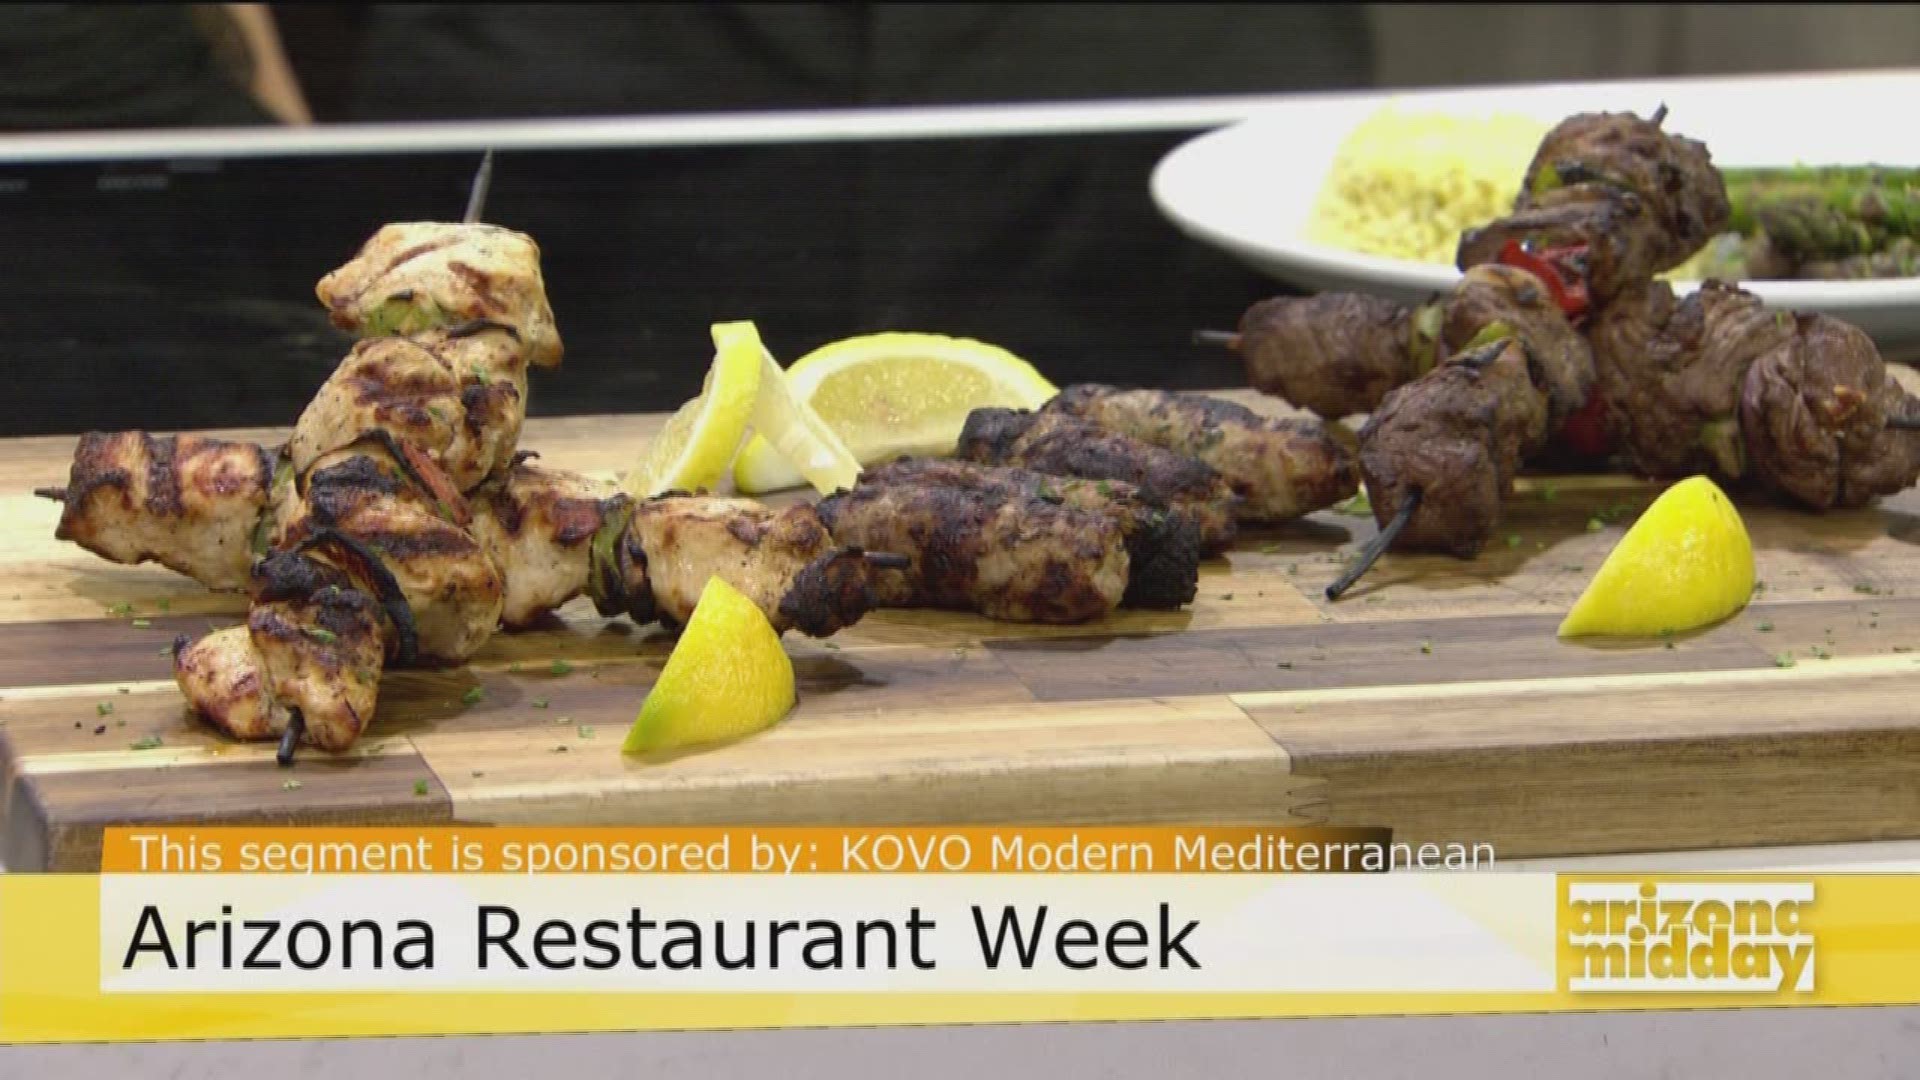 Chef Eric Andrade and Owner Yianni Ioannou of KOVO Modern Mediterranean are showing us a delicious recipe and everything you can get during Arizona Restaurant Week